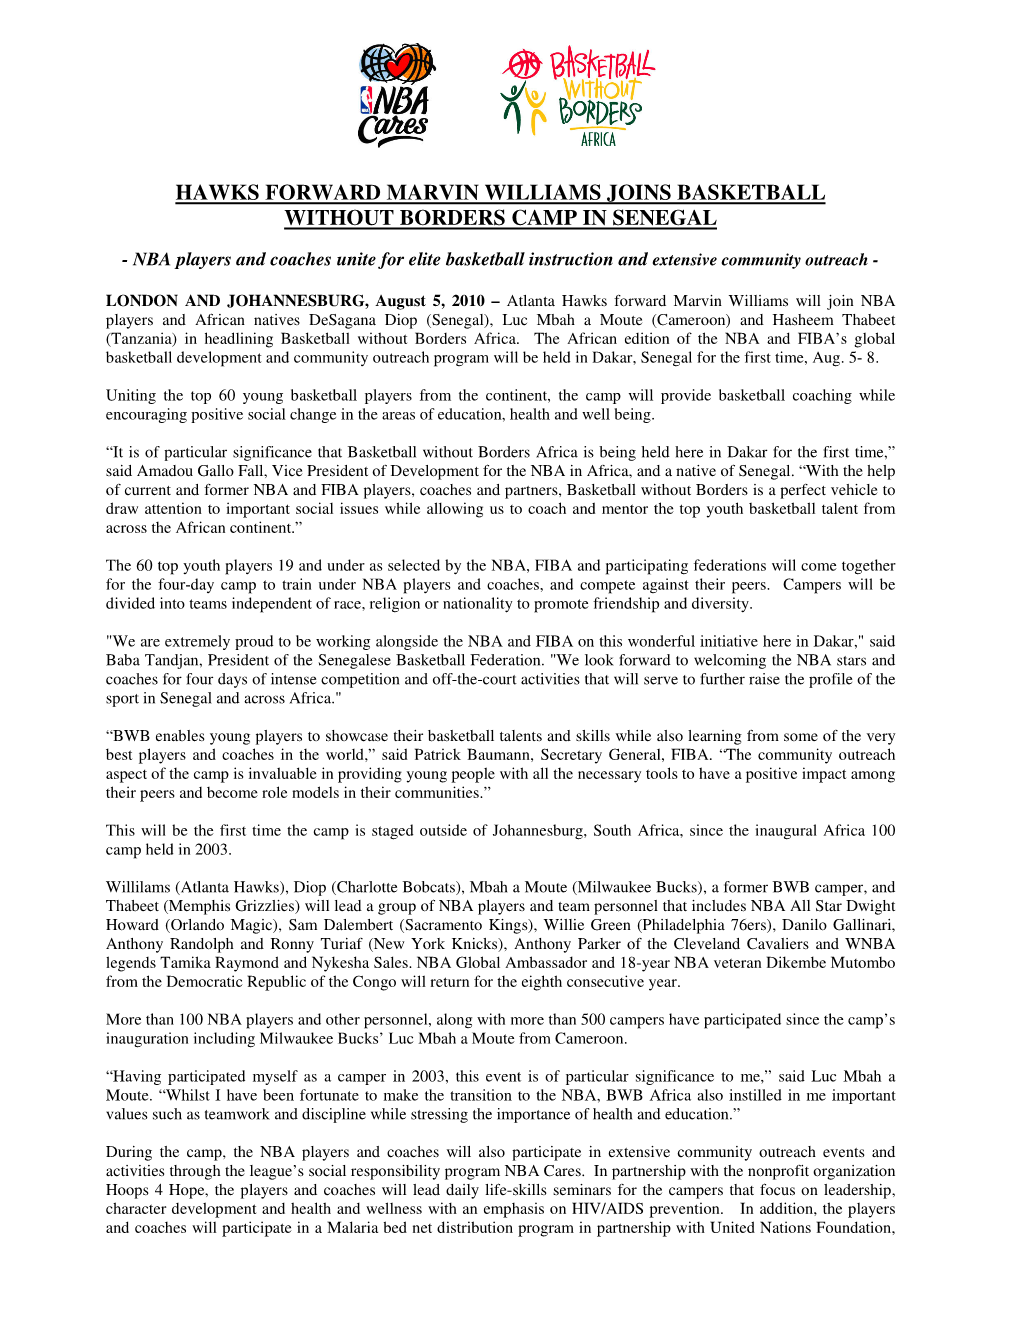 Hawks Forward Marvin Williams Joins Basketball Without Borders Camp in Senegal